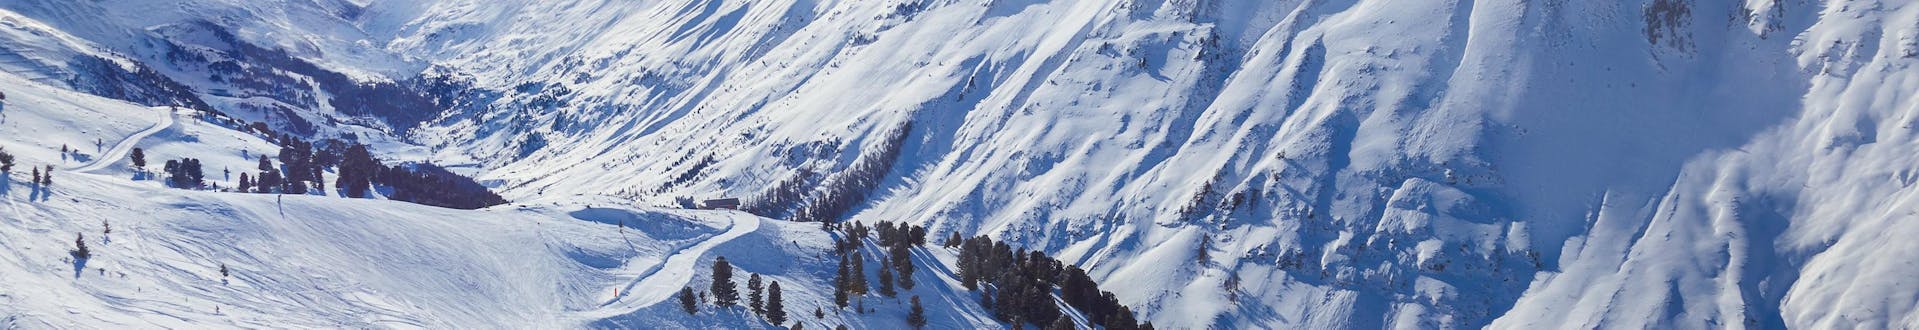 View of the alpine landscape of the ski resorts Obergurgl and Hochgurgl where local ski schools offer their ski lessons.